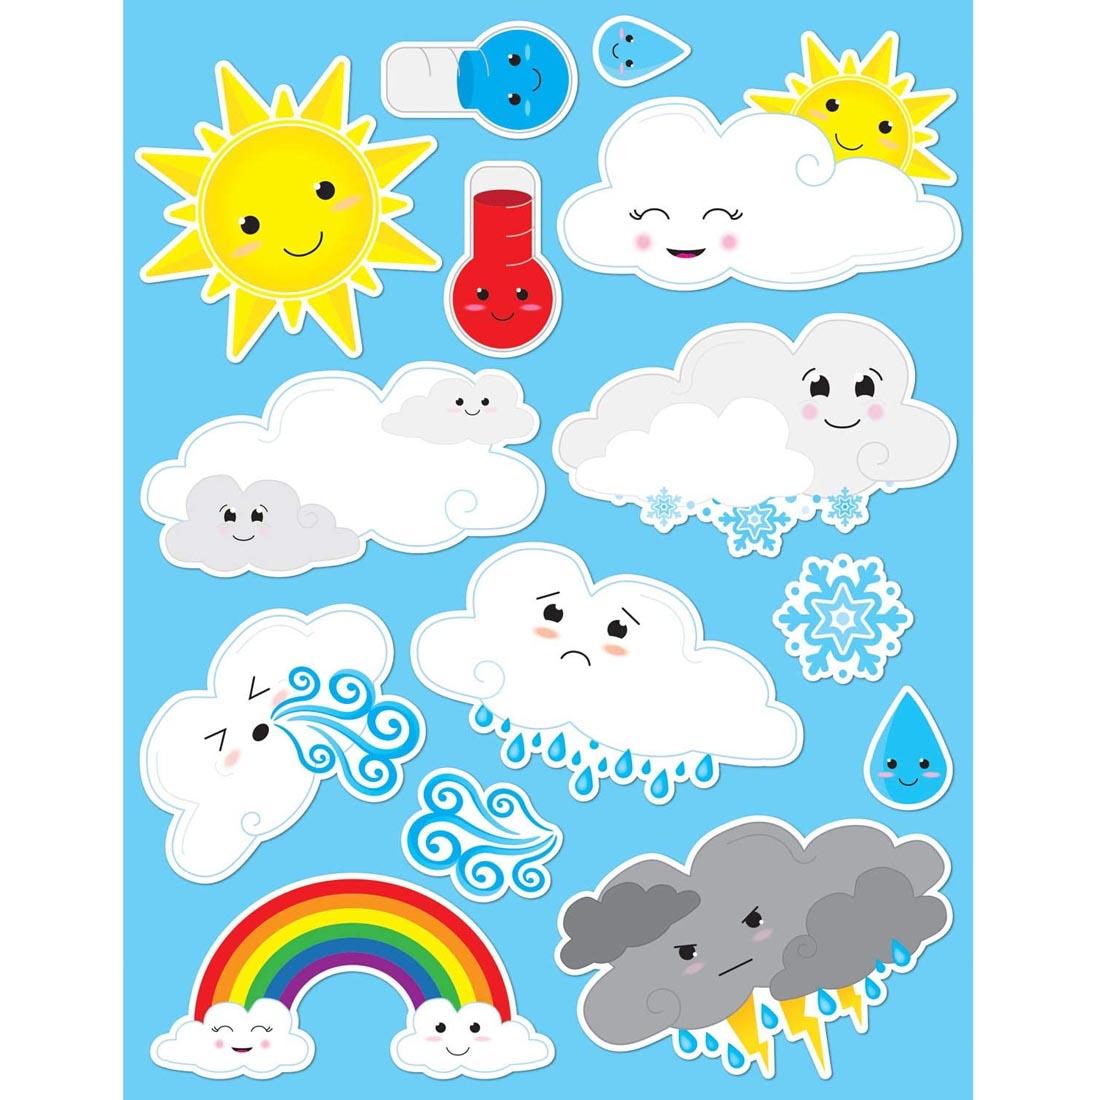 sheet of weather magnets with sun, thermometers and clouds to indicate windy, snowing, raining and more